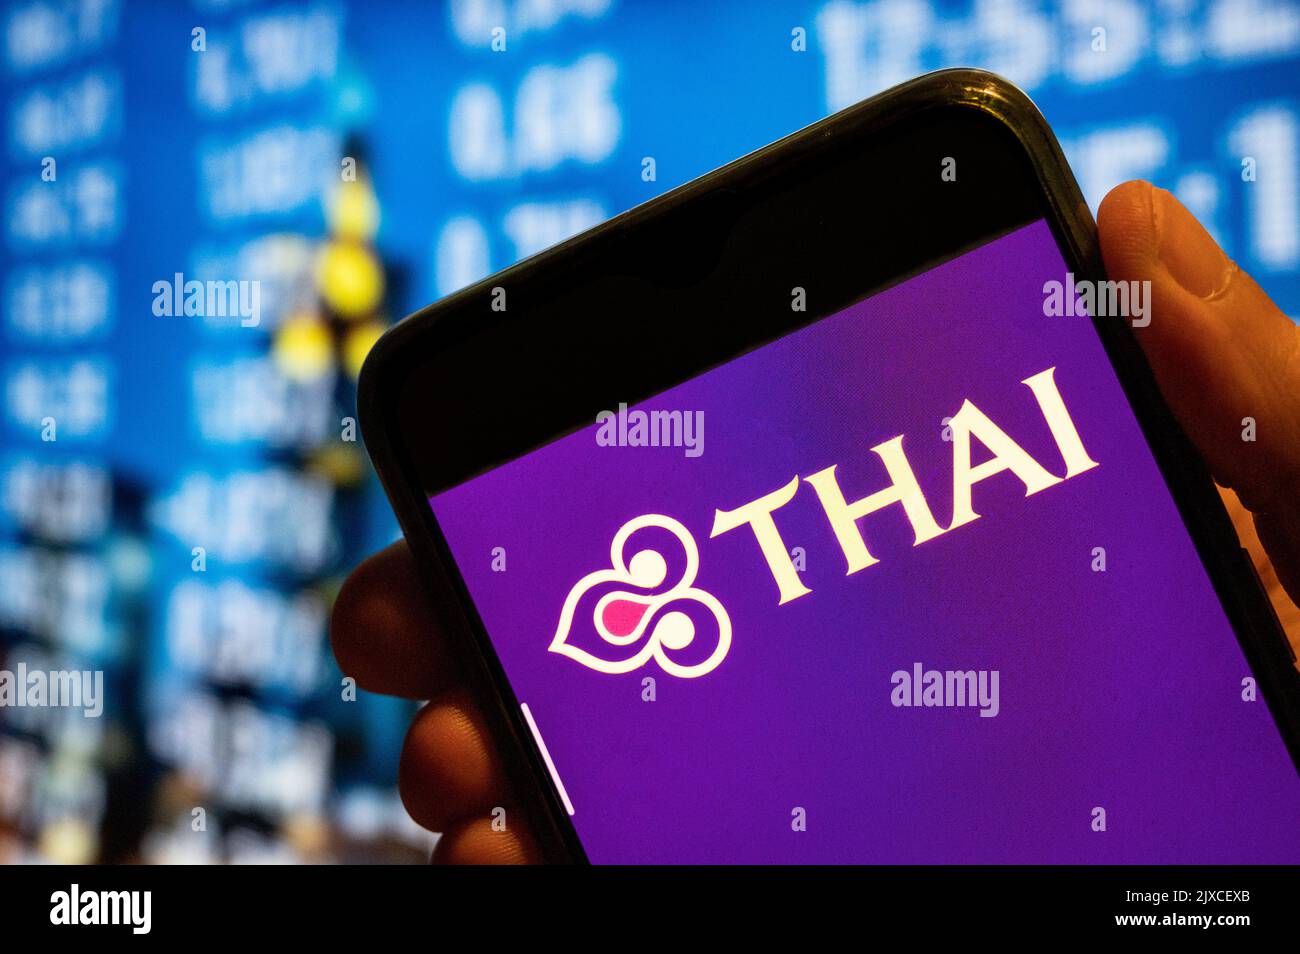 In this photo illustration, the flag carrier airline of Thailand, Thai Airways, logo is displayed on a smartphone screen. Stock Photo